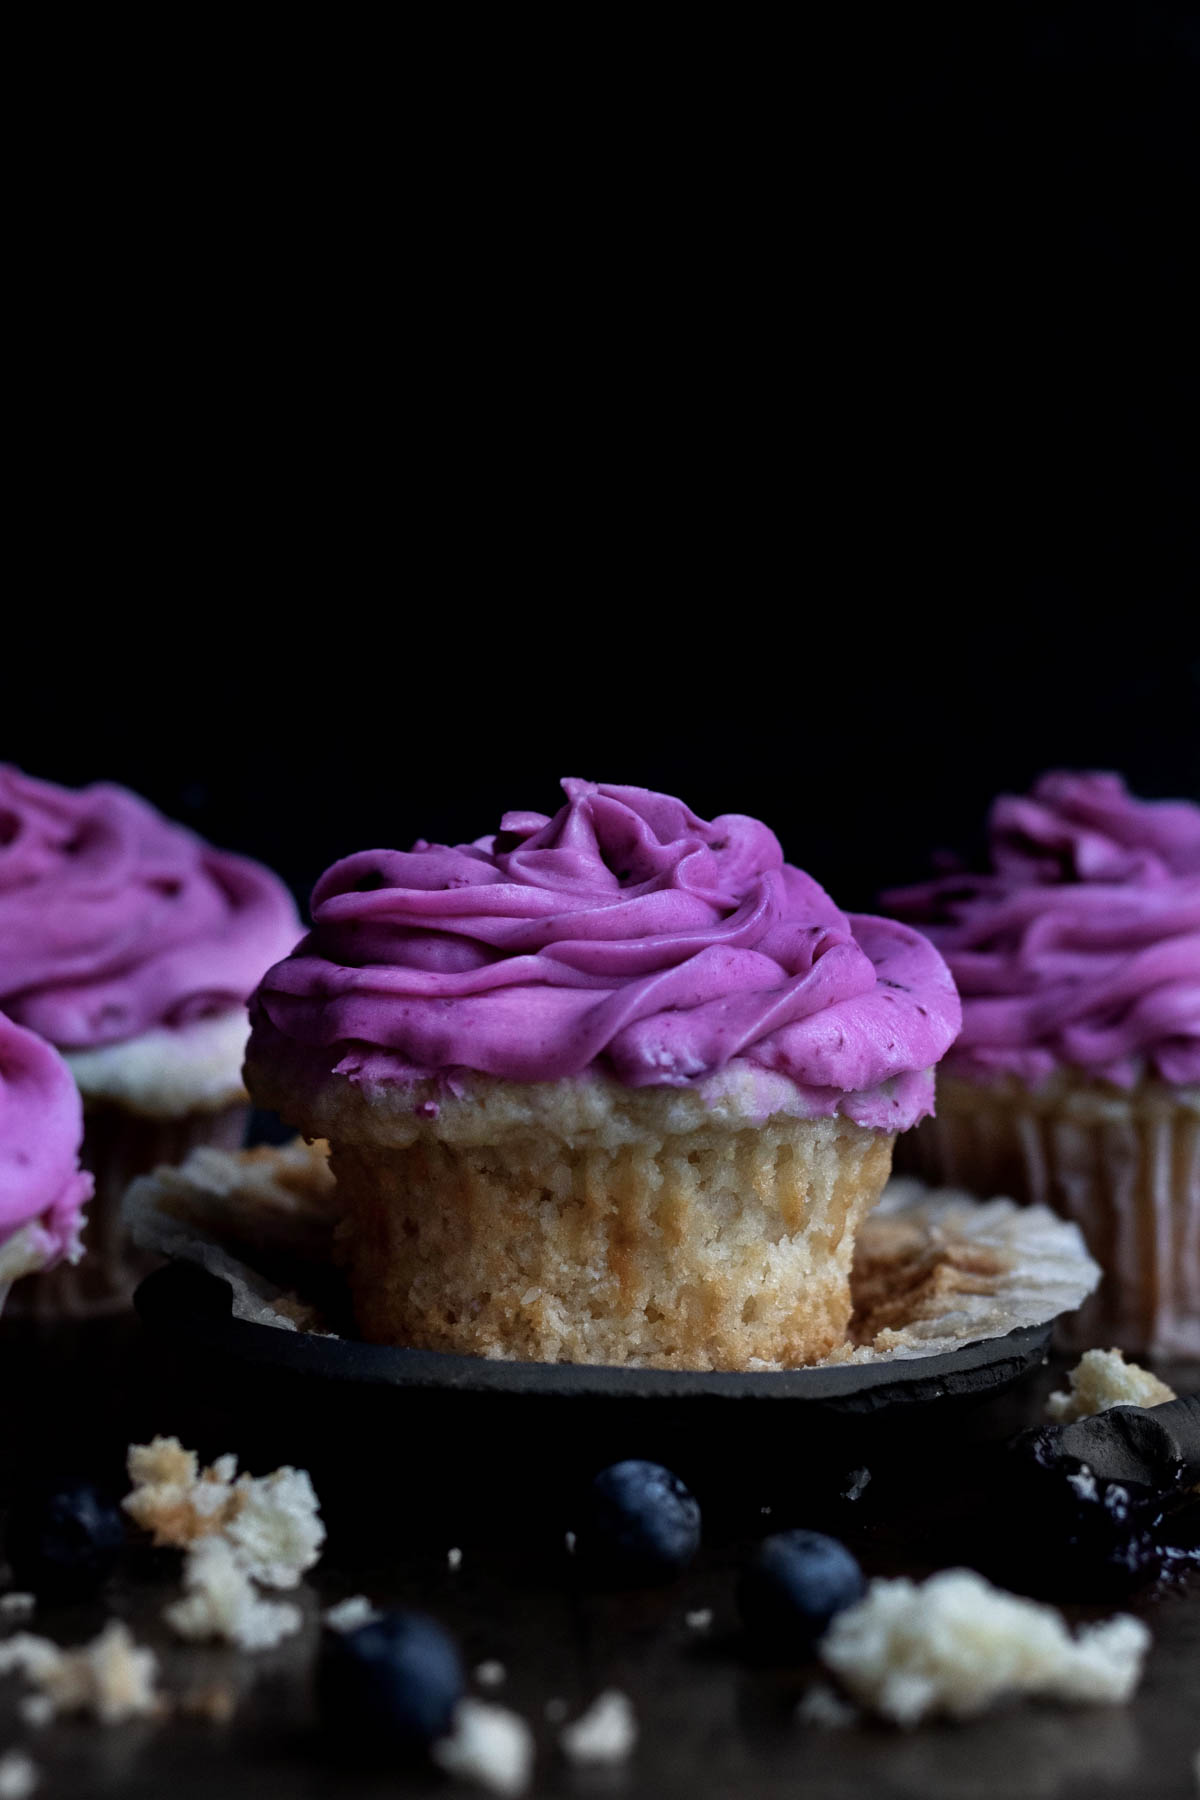 Gluten free Blueberry Cupcake sitting with a swirl of bright purple frosting.